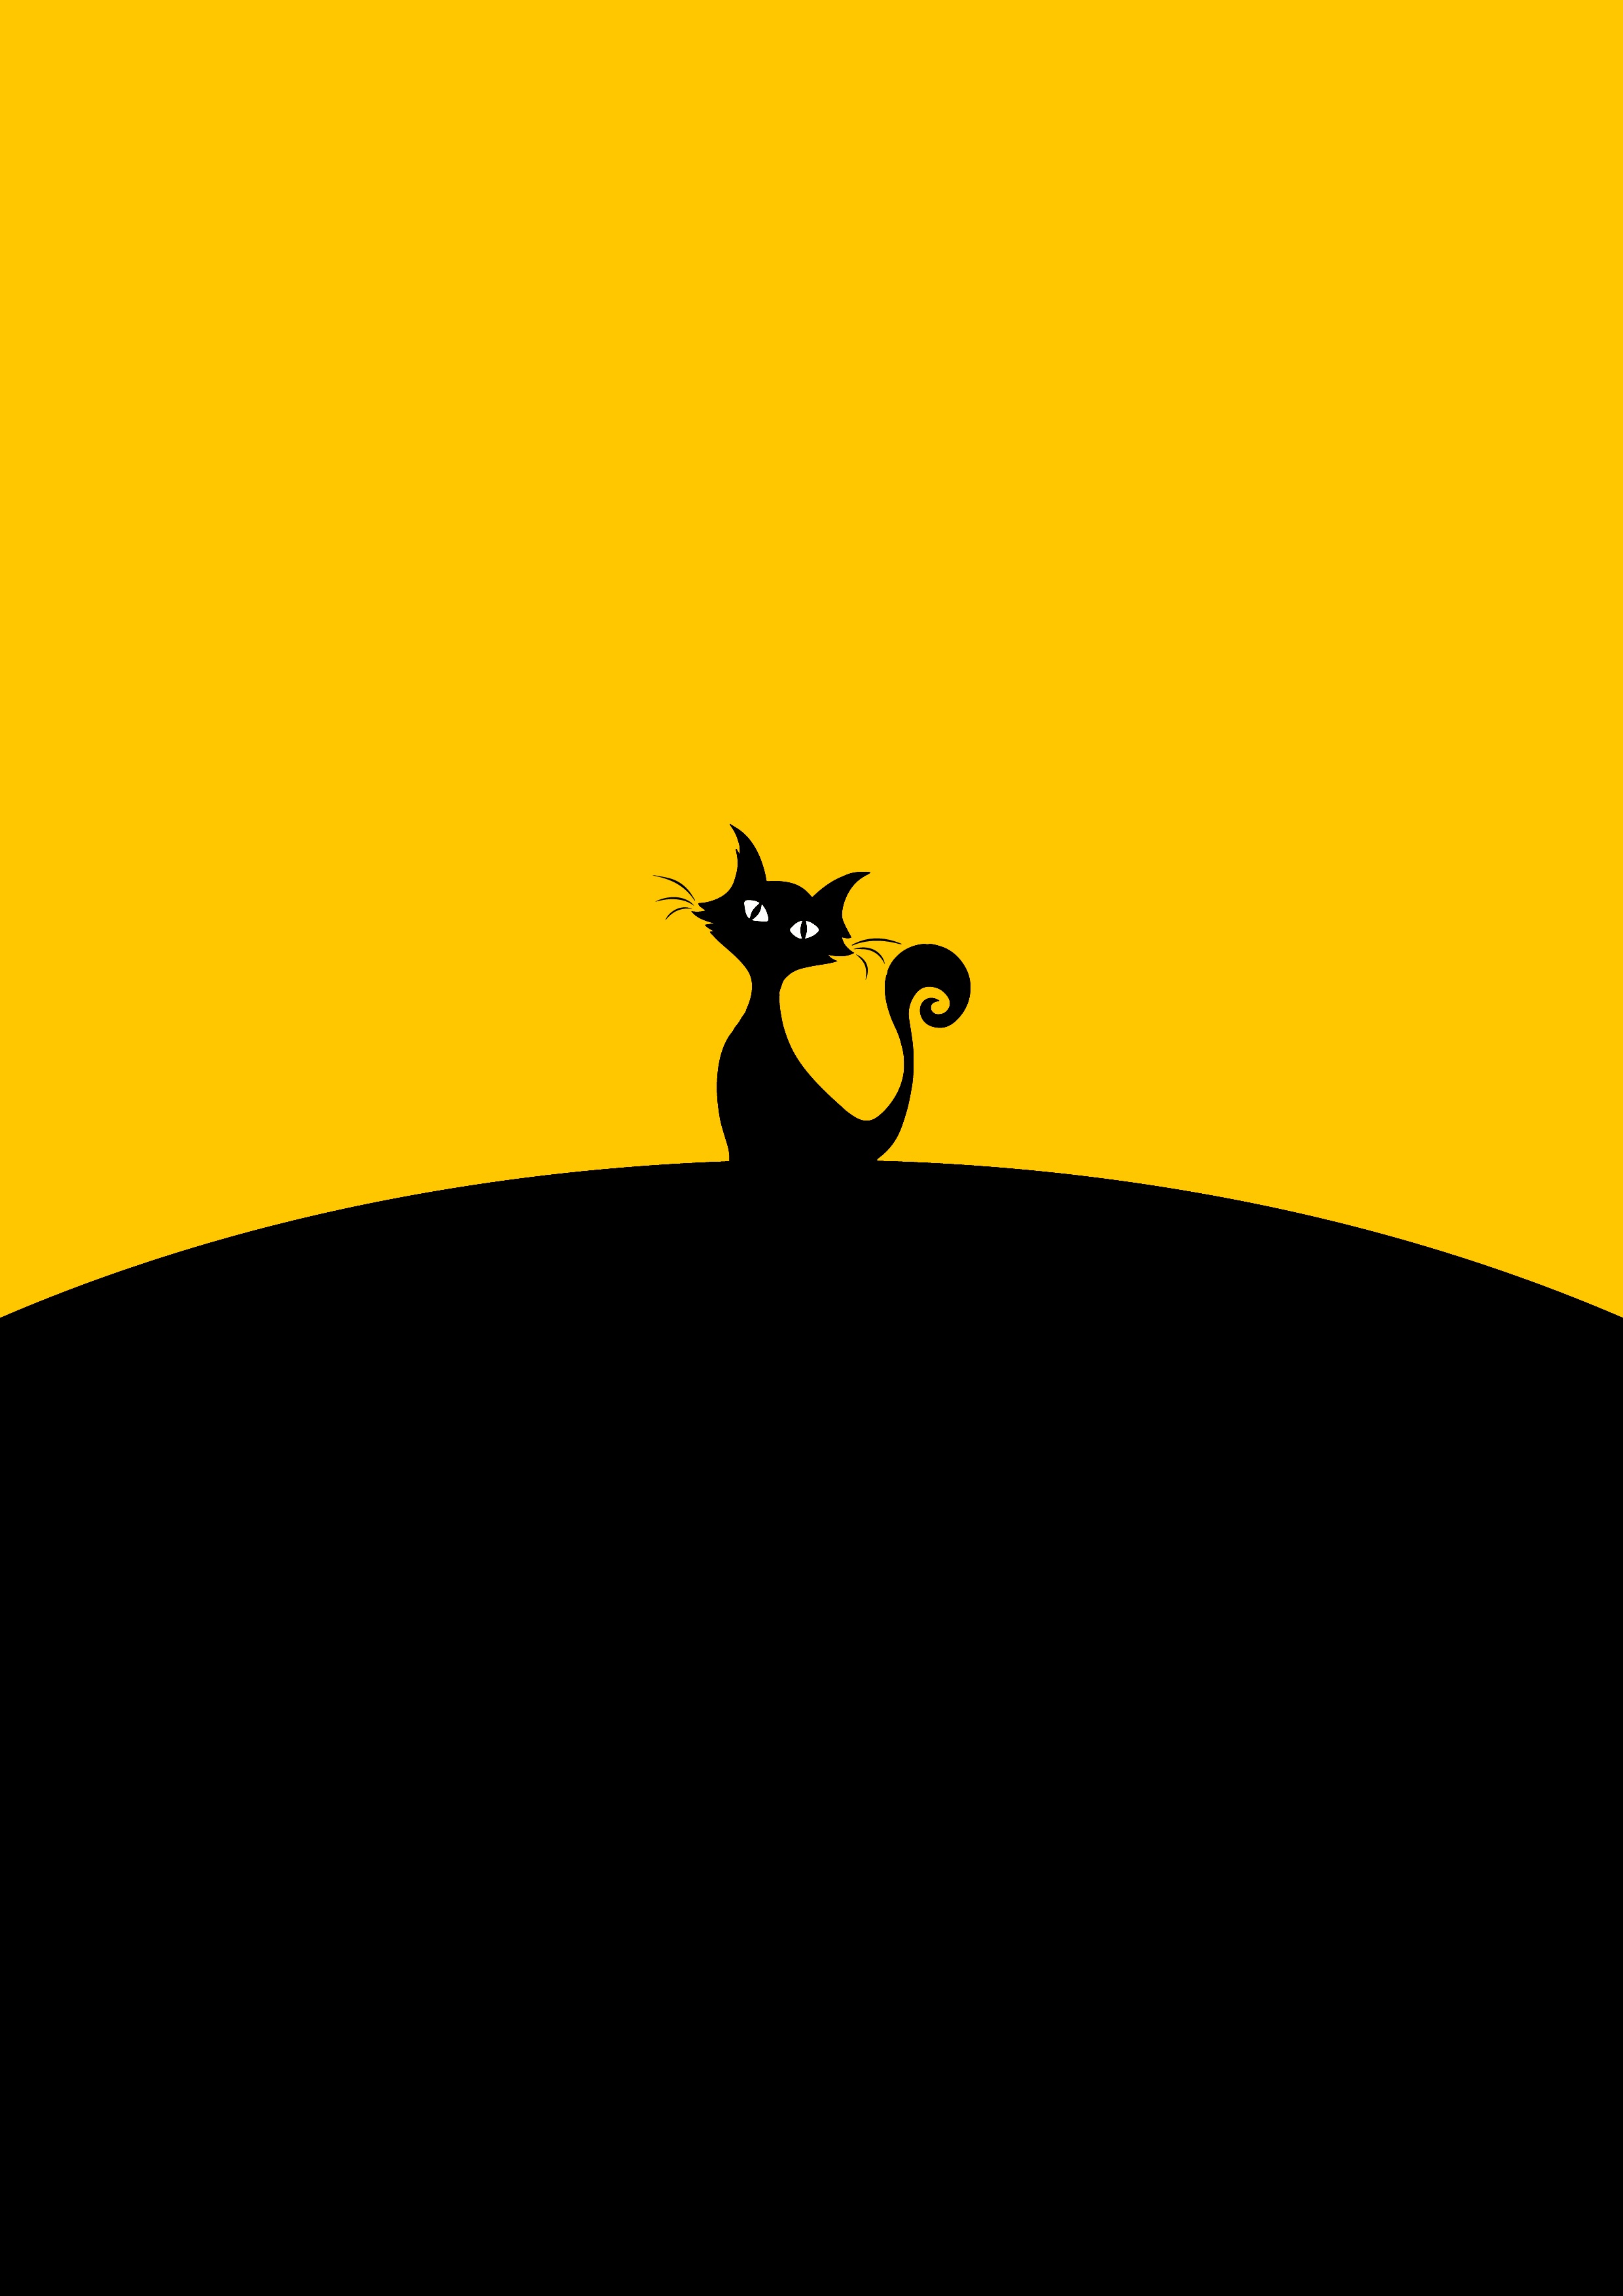 yellow, black, silhouette, vector, minimalism, cat images